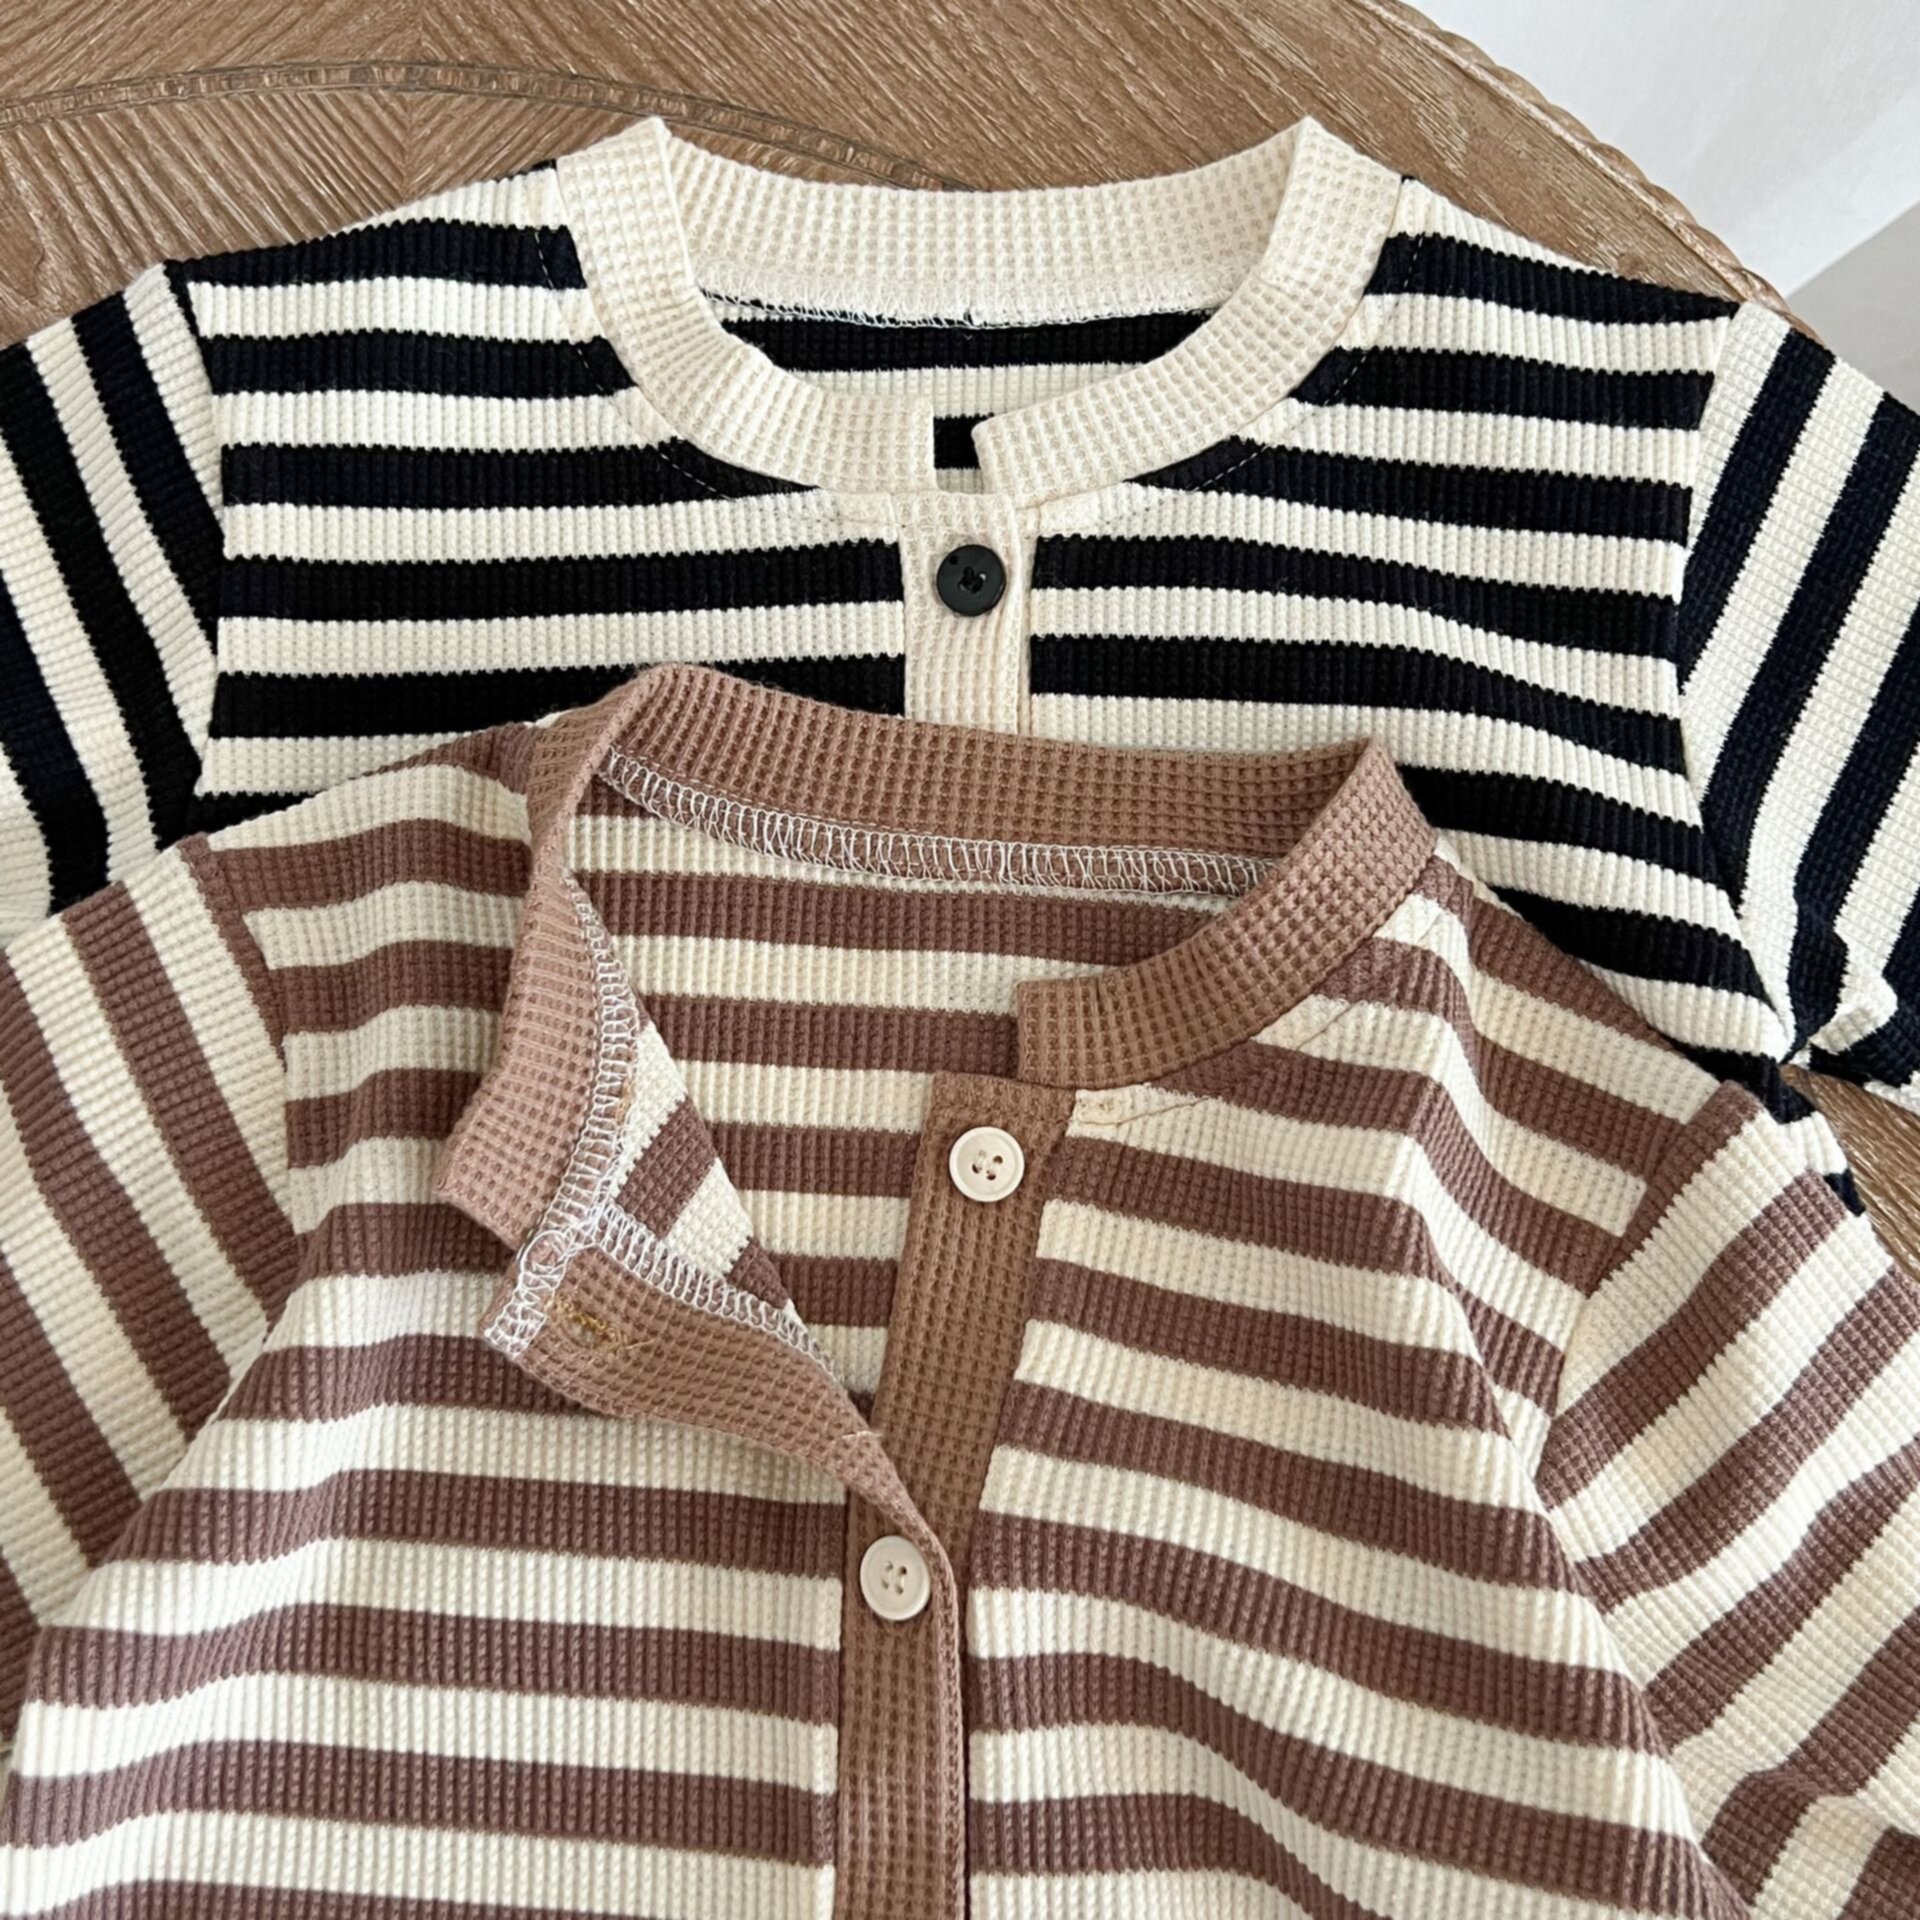 Autumn new striped baby crawling outfits manufacturer